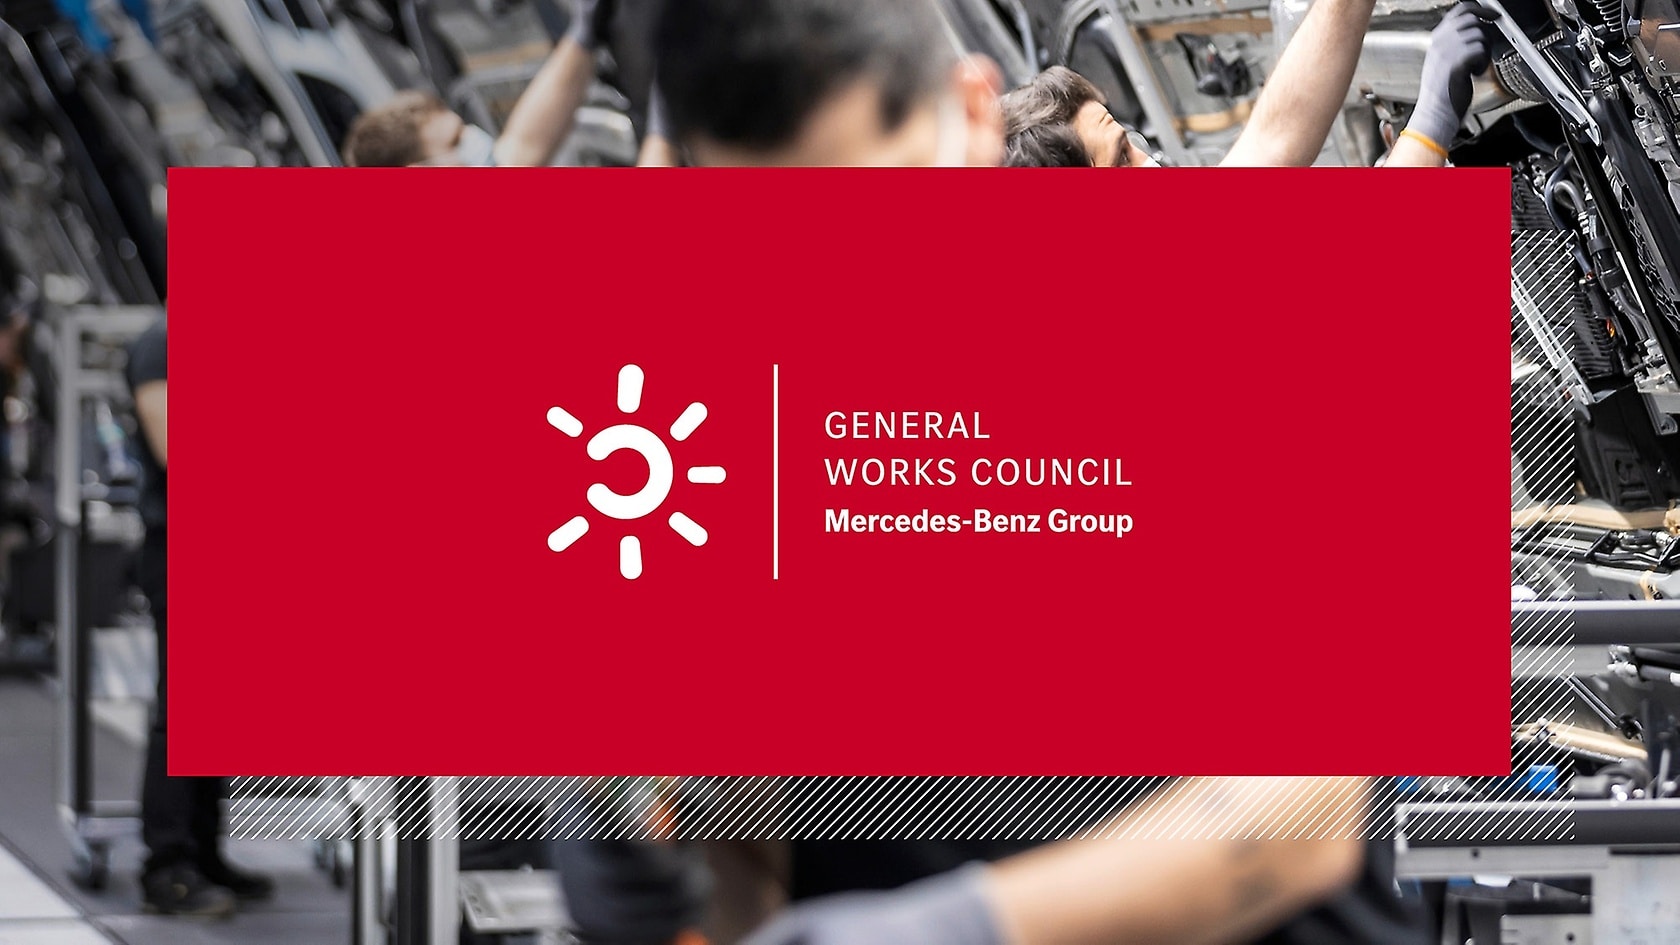 General Works Council Mercedes-Benz Group.